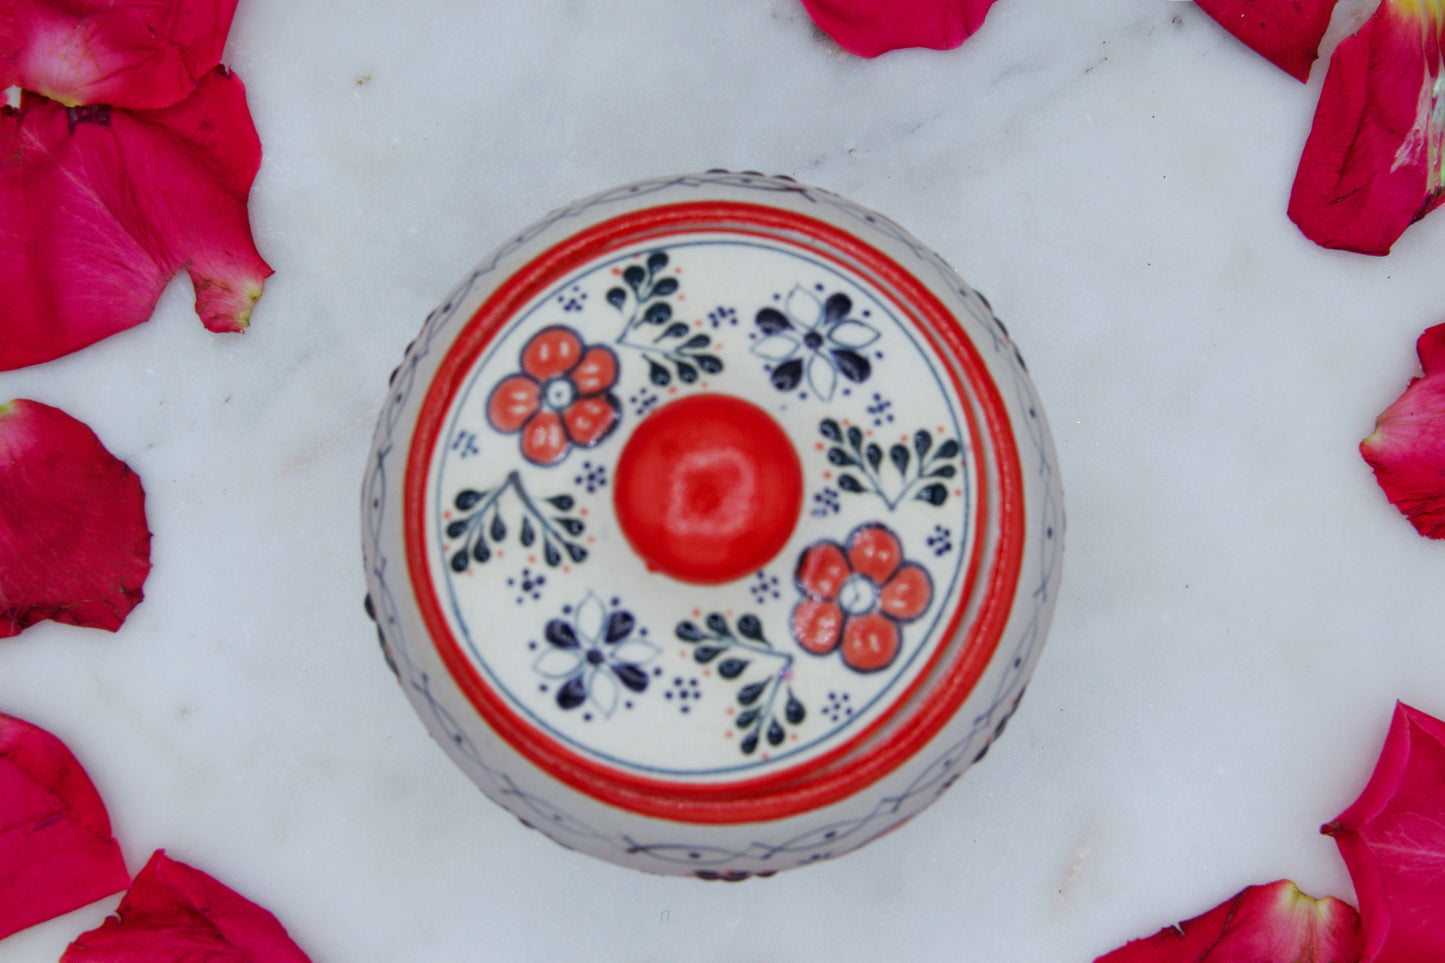 Top view of the handmade artisanal candle in a red floral design talavera with a closed lid on its side. Custom made by Artisan in Mexico. 100% All Natural Soy Candle. Reuse the talavera as home decor or storage.